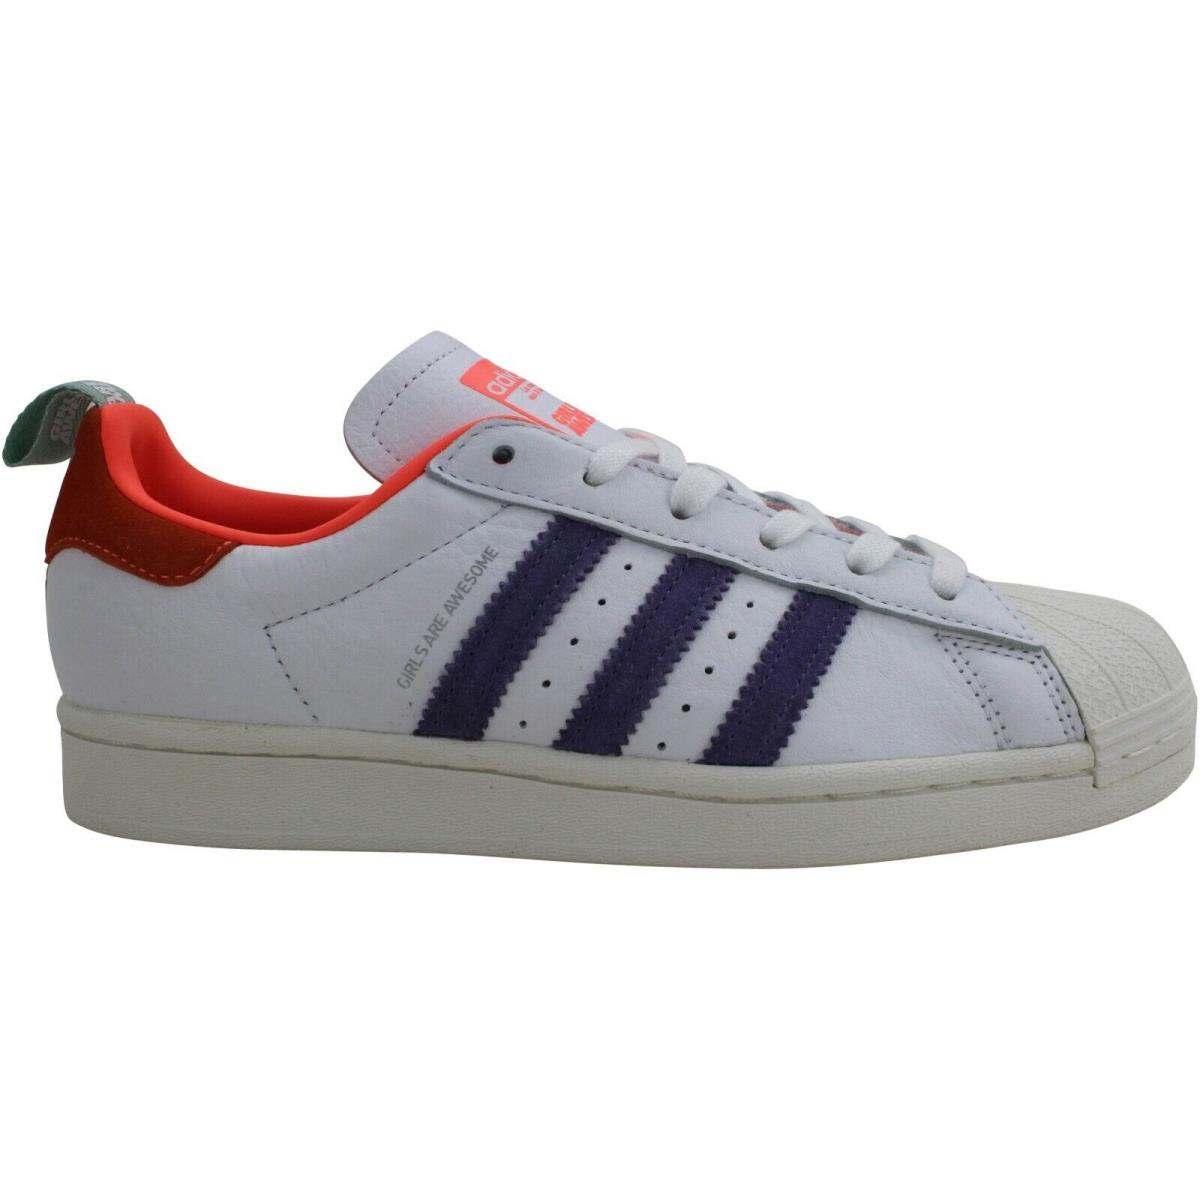 Adidas Superstar Men`s Shoes Cloud White/icey Pink/signal Coral FW8087 - Cloud White/Icey Pink/Signal Coral